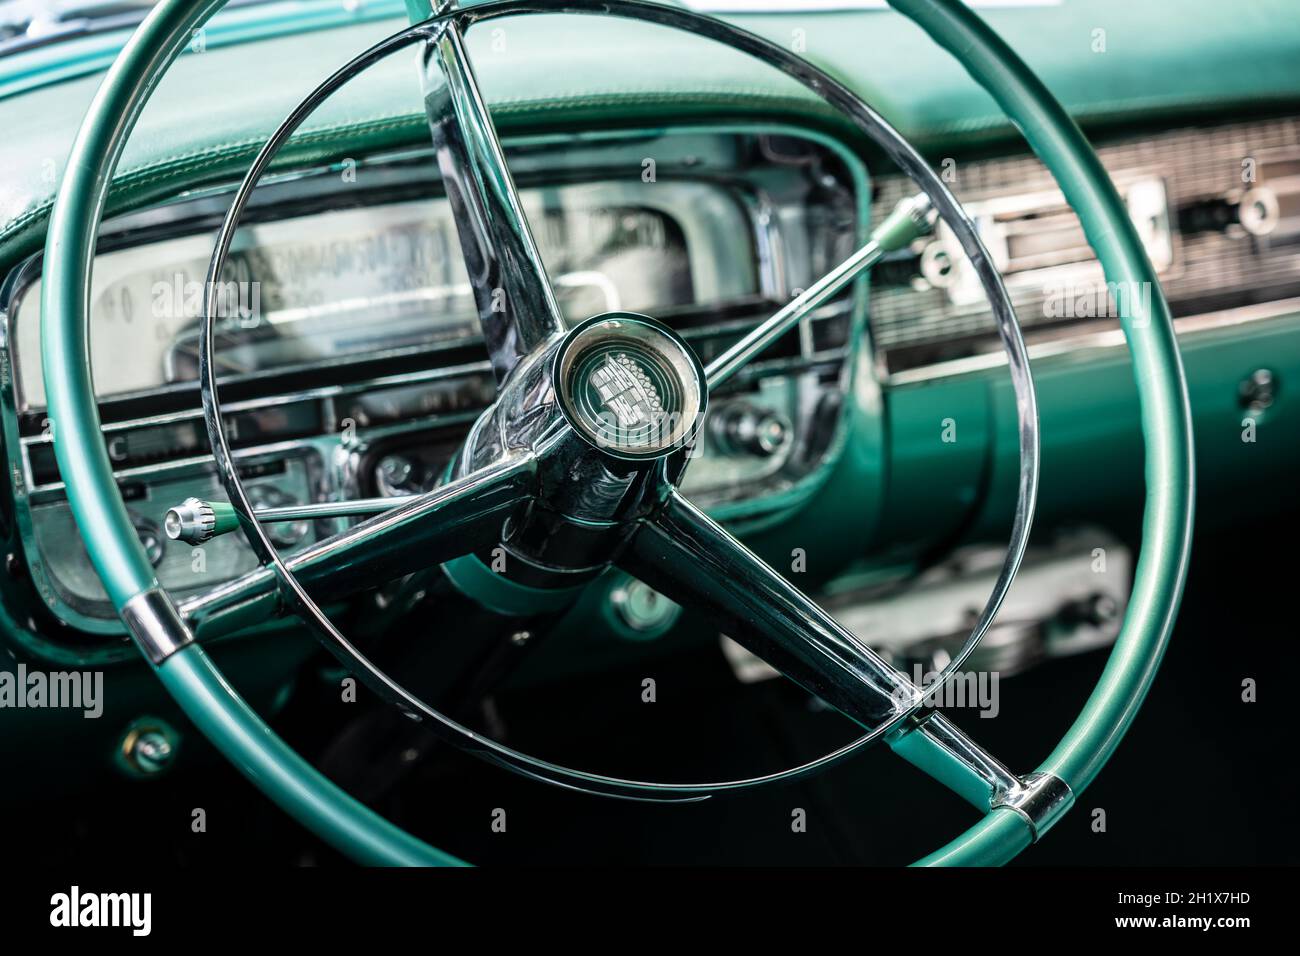 DIEDERSDORF, GERMANY - AUGUST 21, 2021: The dashboard of luxury car Cadillac Series 62 Coupe de Ville, 1953. Close-up. Focus on the foreground. The ex Stock Photo